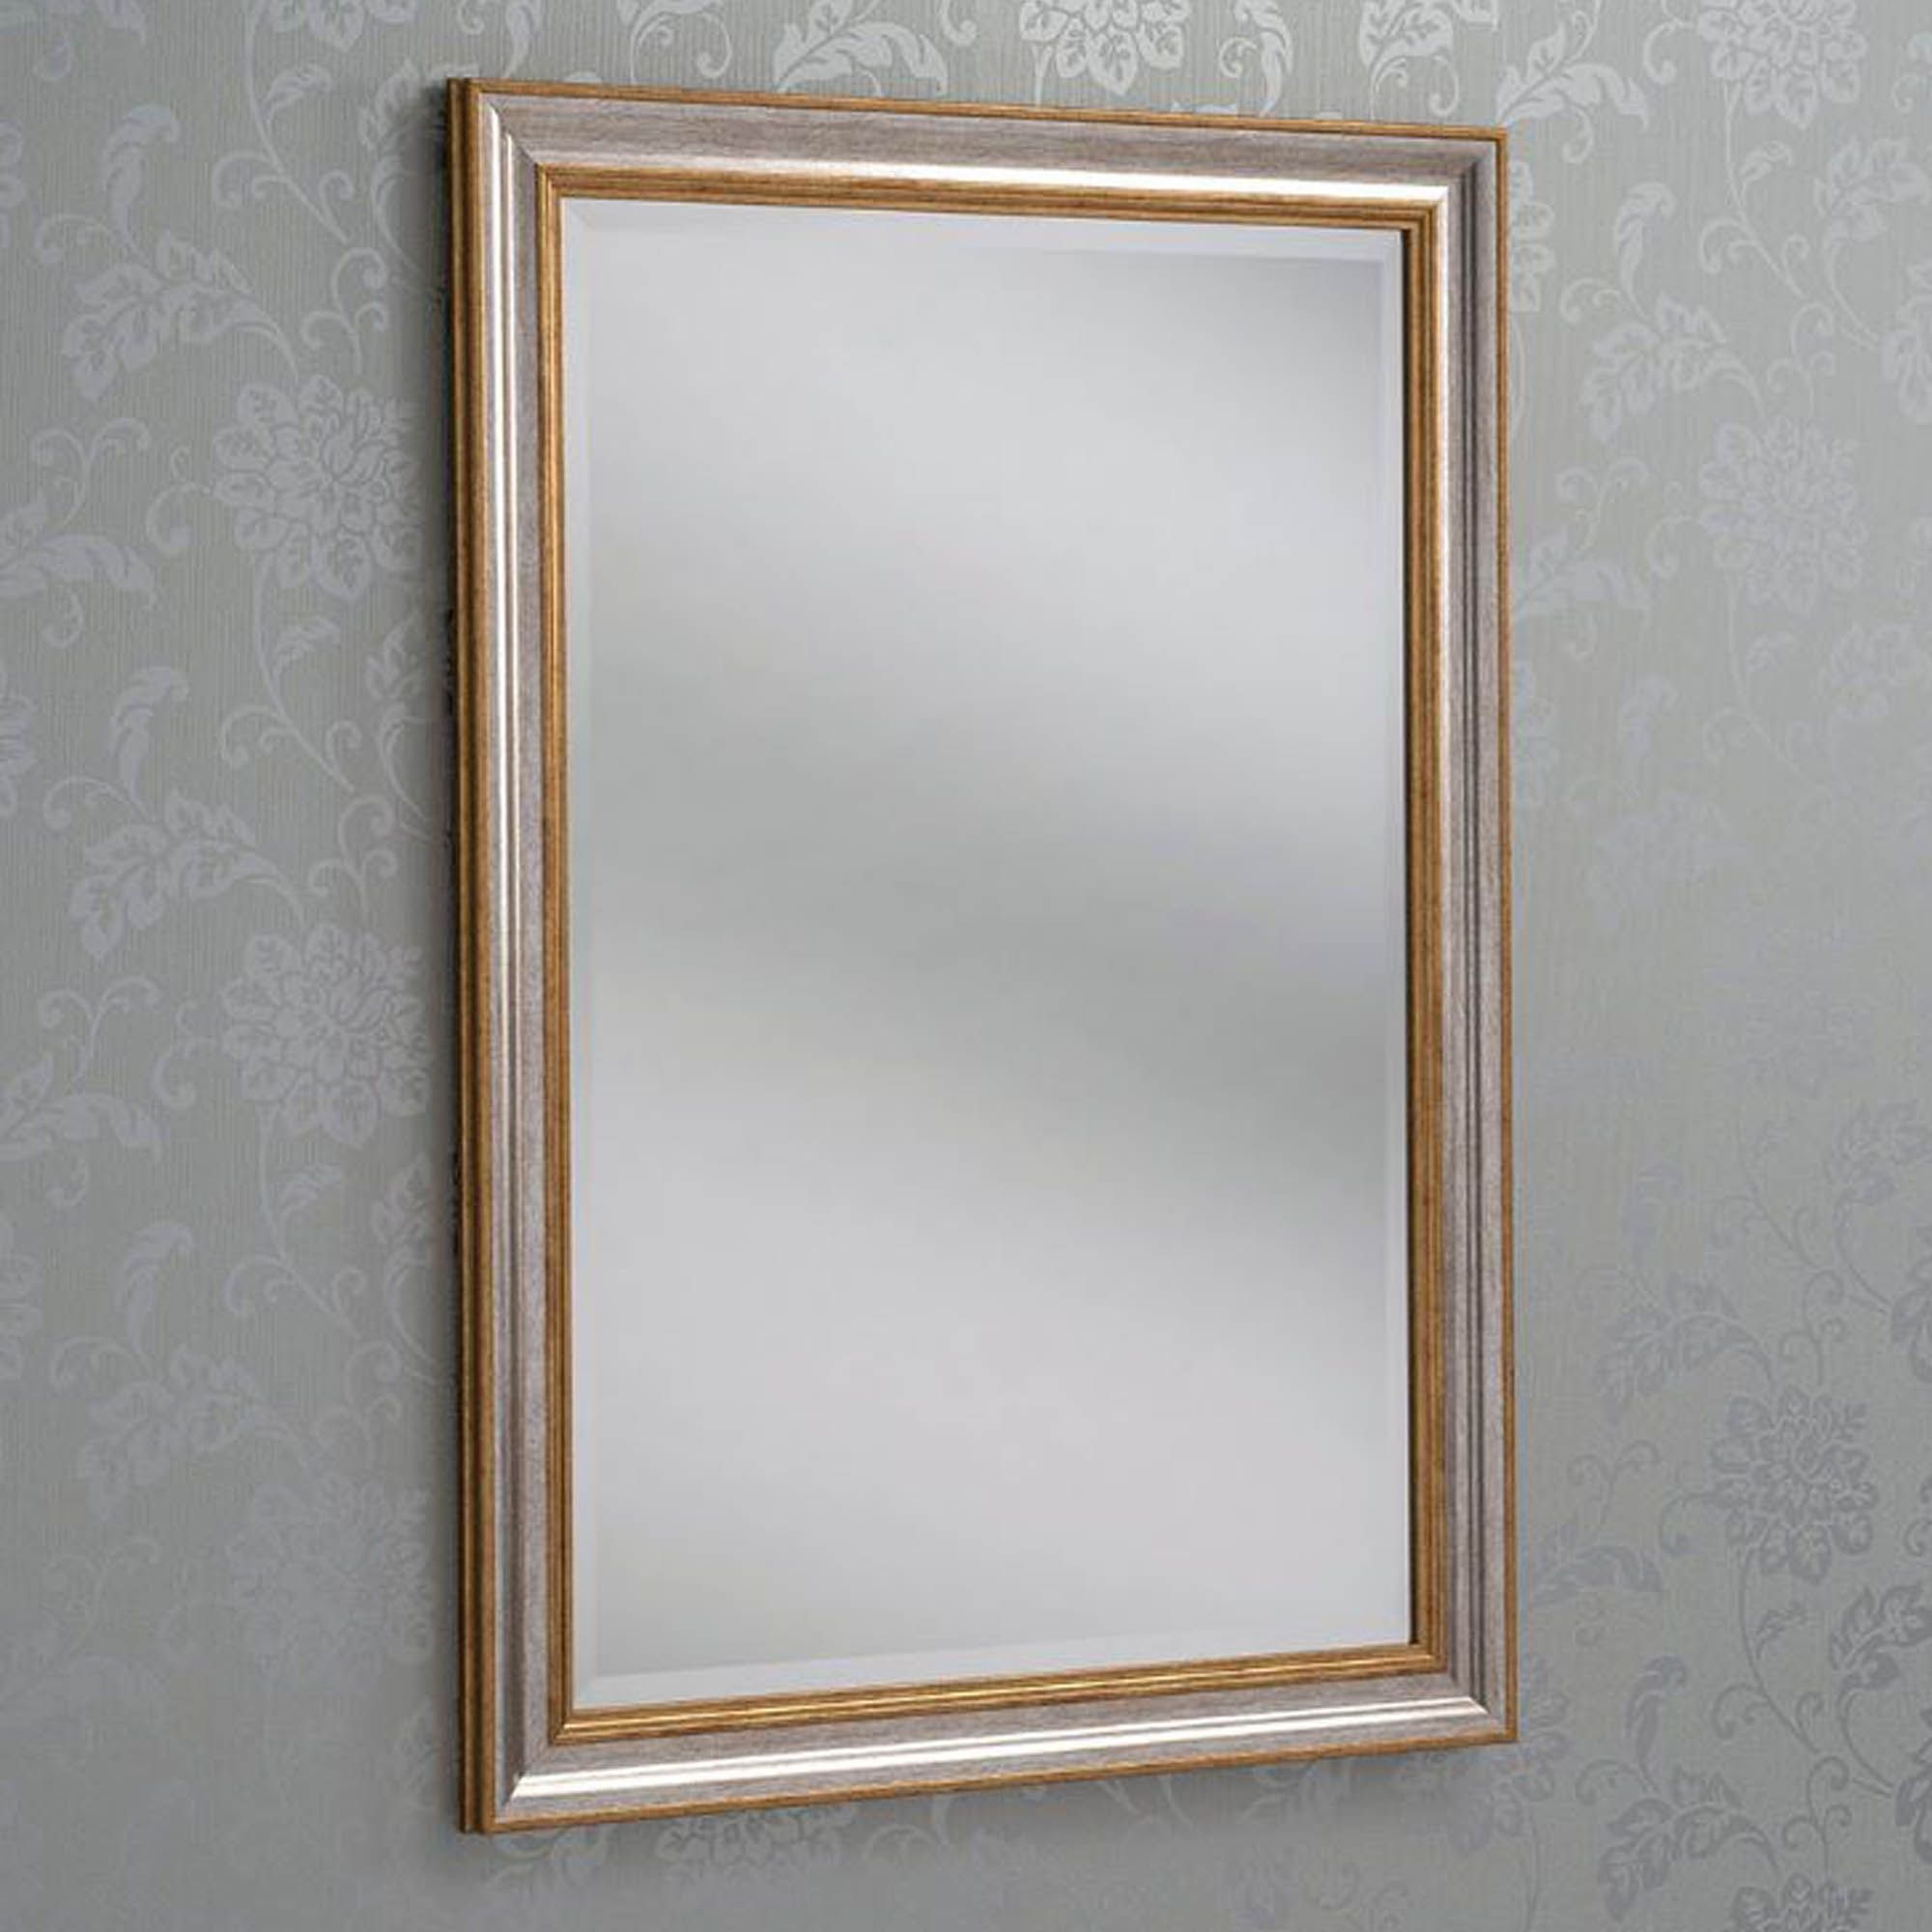 Gold & Silver Rectangular Wall Mirror | Wall Mirror Hd365 Inside Brushed Gold Rectangular Framed Wall Mirrors (Photo 2 of 15)